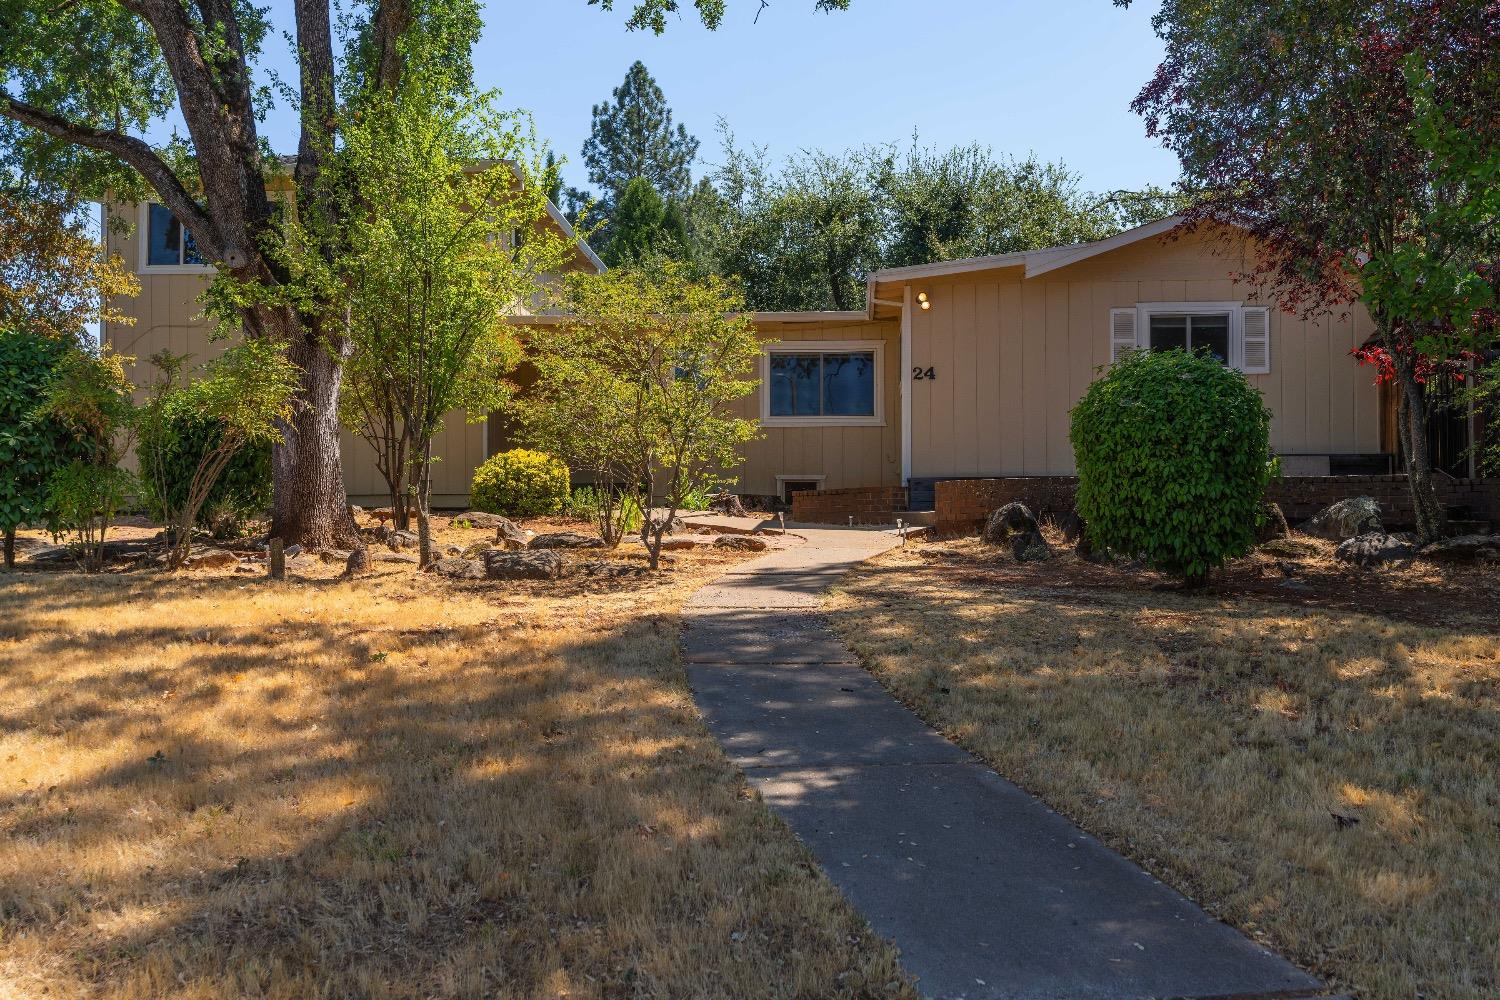 Photo of 24 Pearl St in Sutter Creek, CA